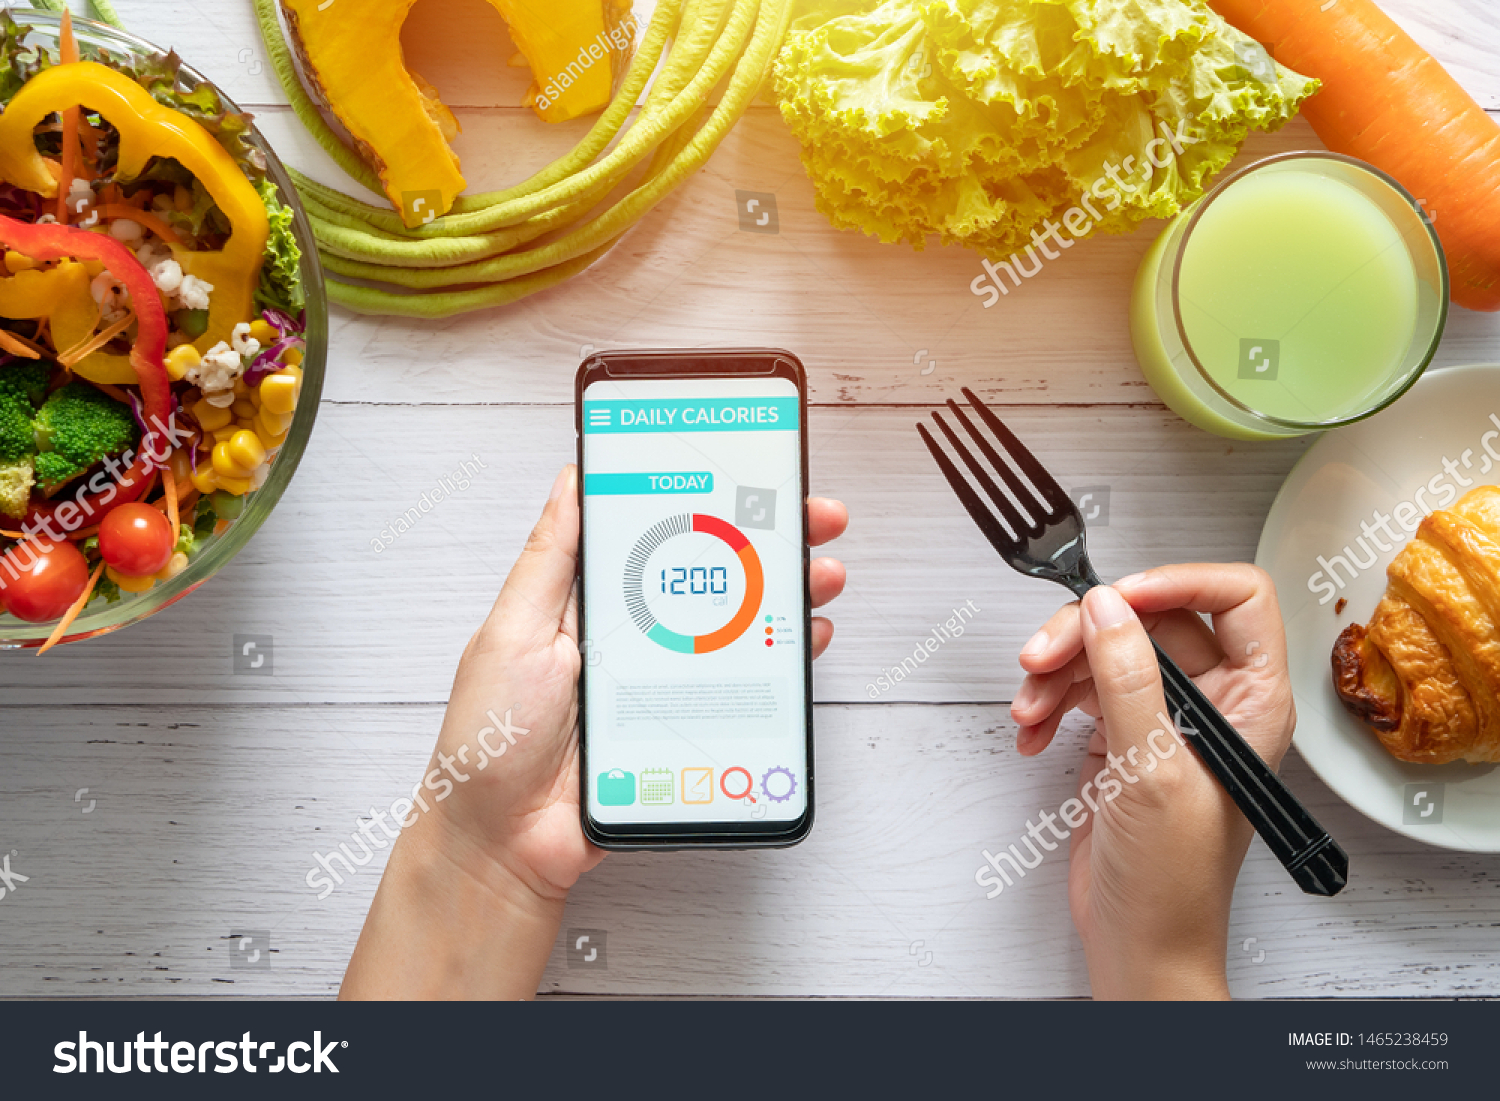 Calories counting , diet , food control and weight loss concept. woman using Calorie counter application on her smartphone at dining table with salad, fruit juice, bread and vegetable #1465238459